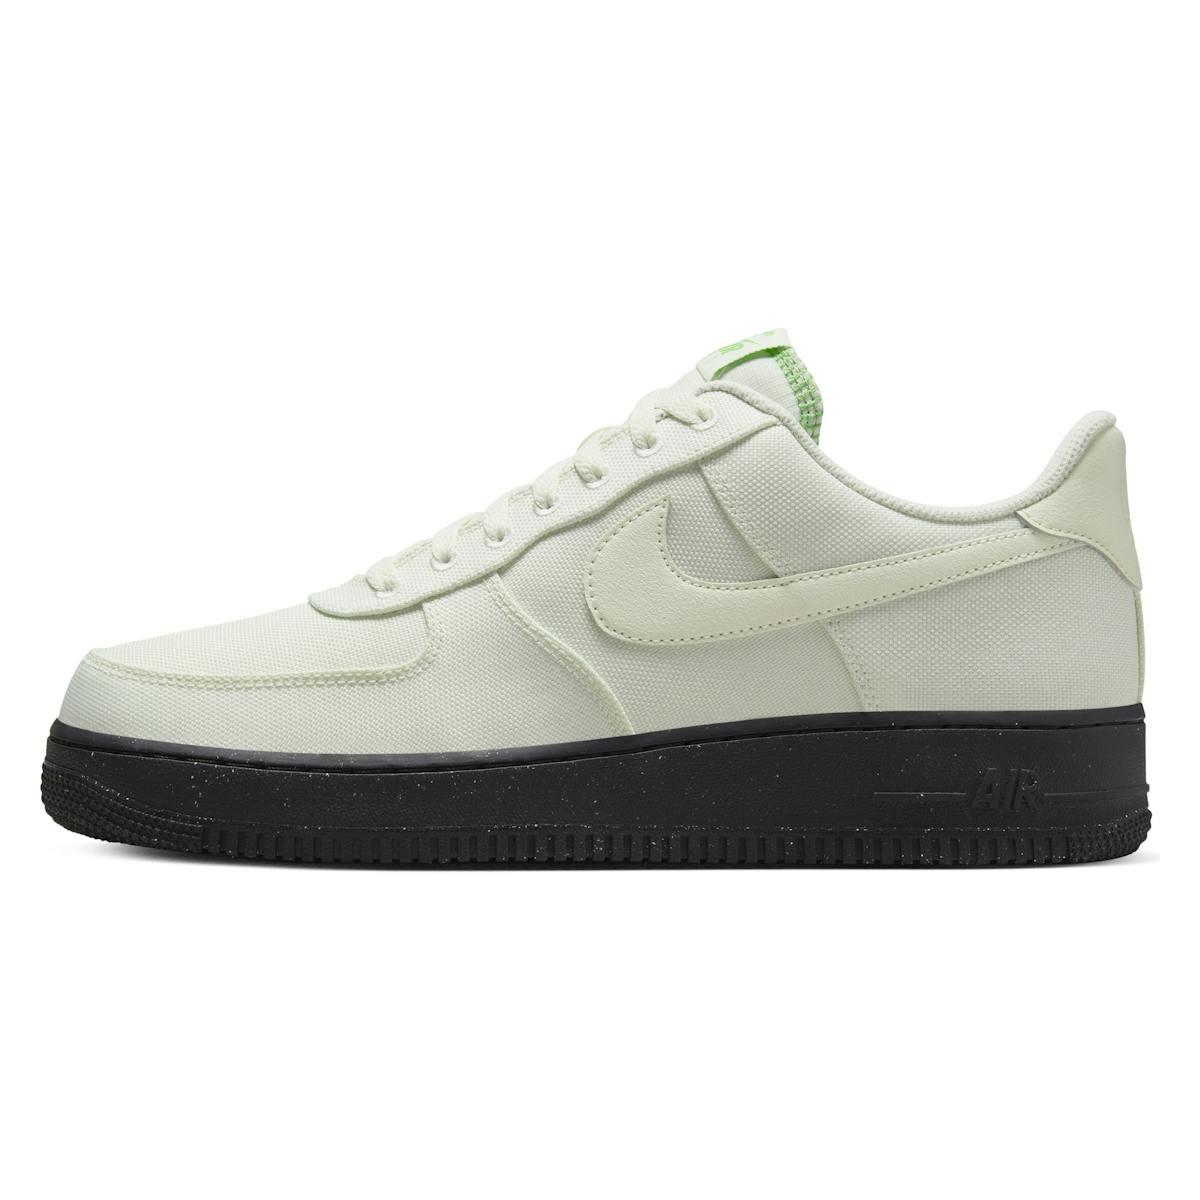 Nike Air Force 1 Sustainable Canvas "Sea Glass"